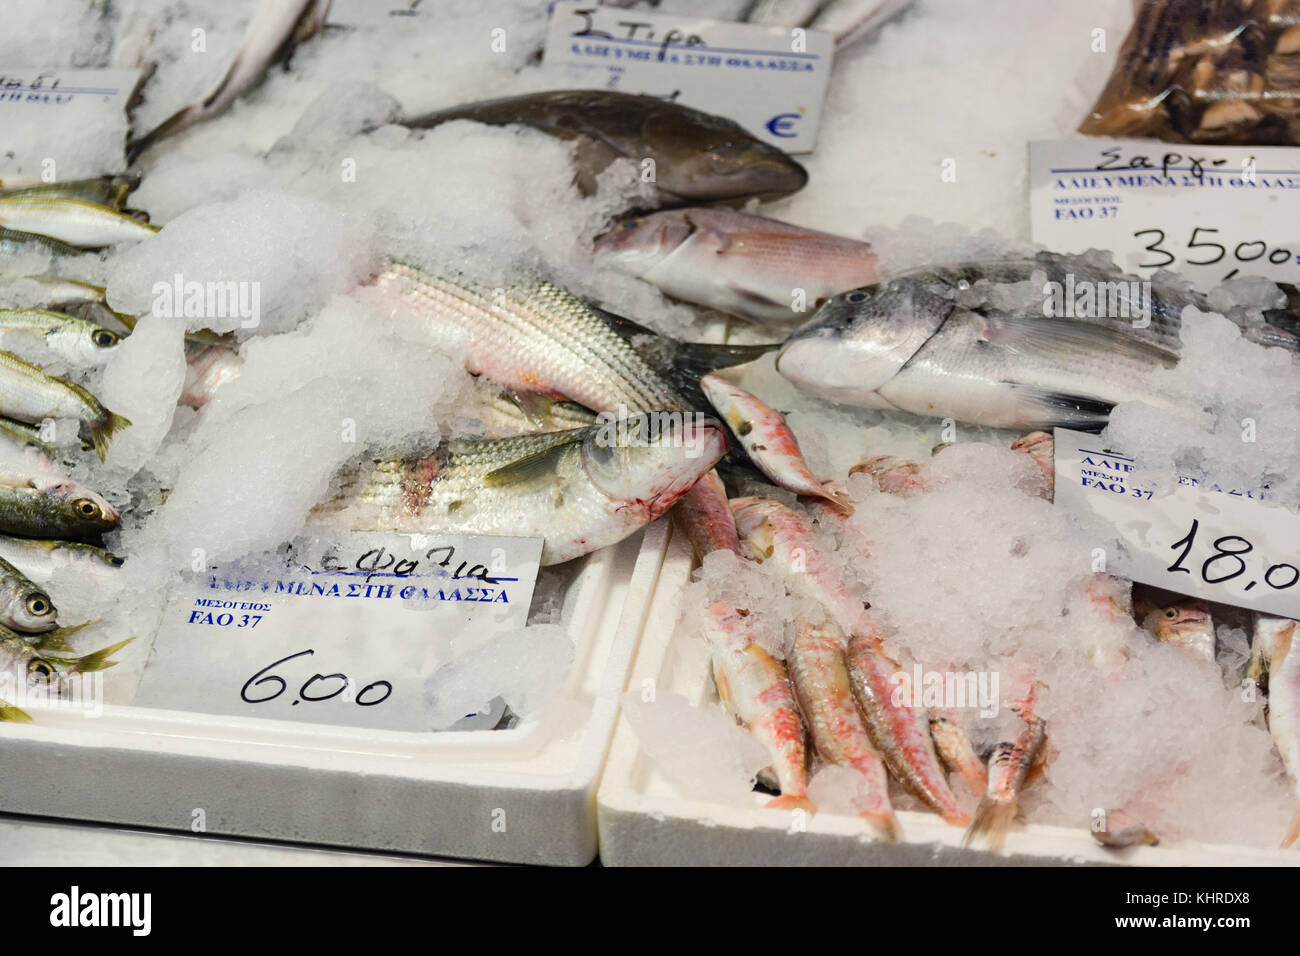 Freshly Caught Fish On Ice For Sale In The Greek Fish Market Stock Photo